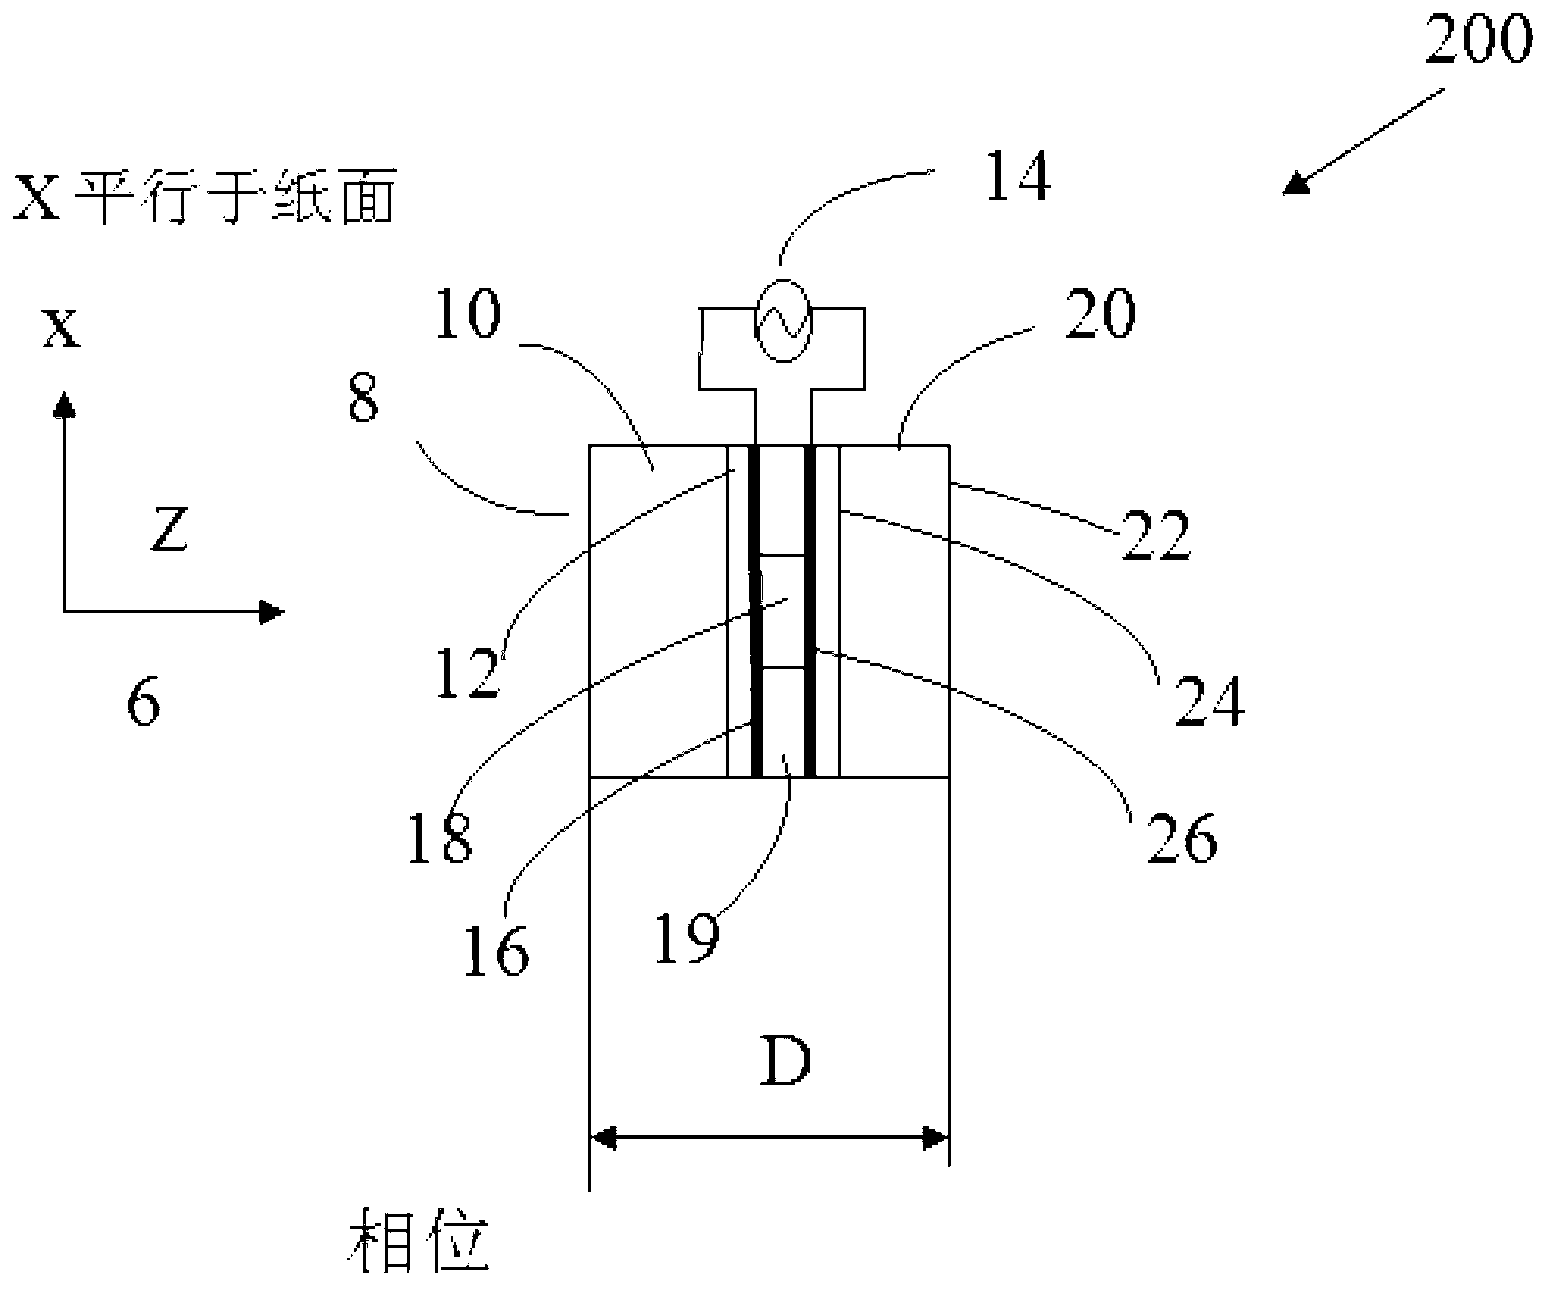 Single-mode continuous tunable optical filter